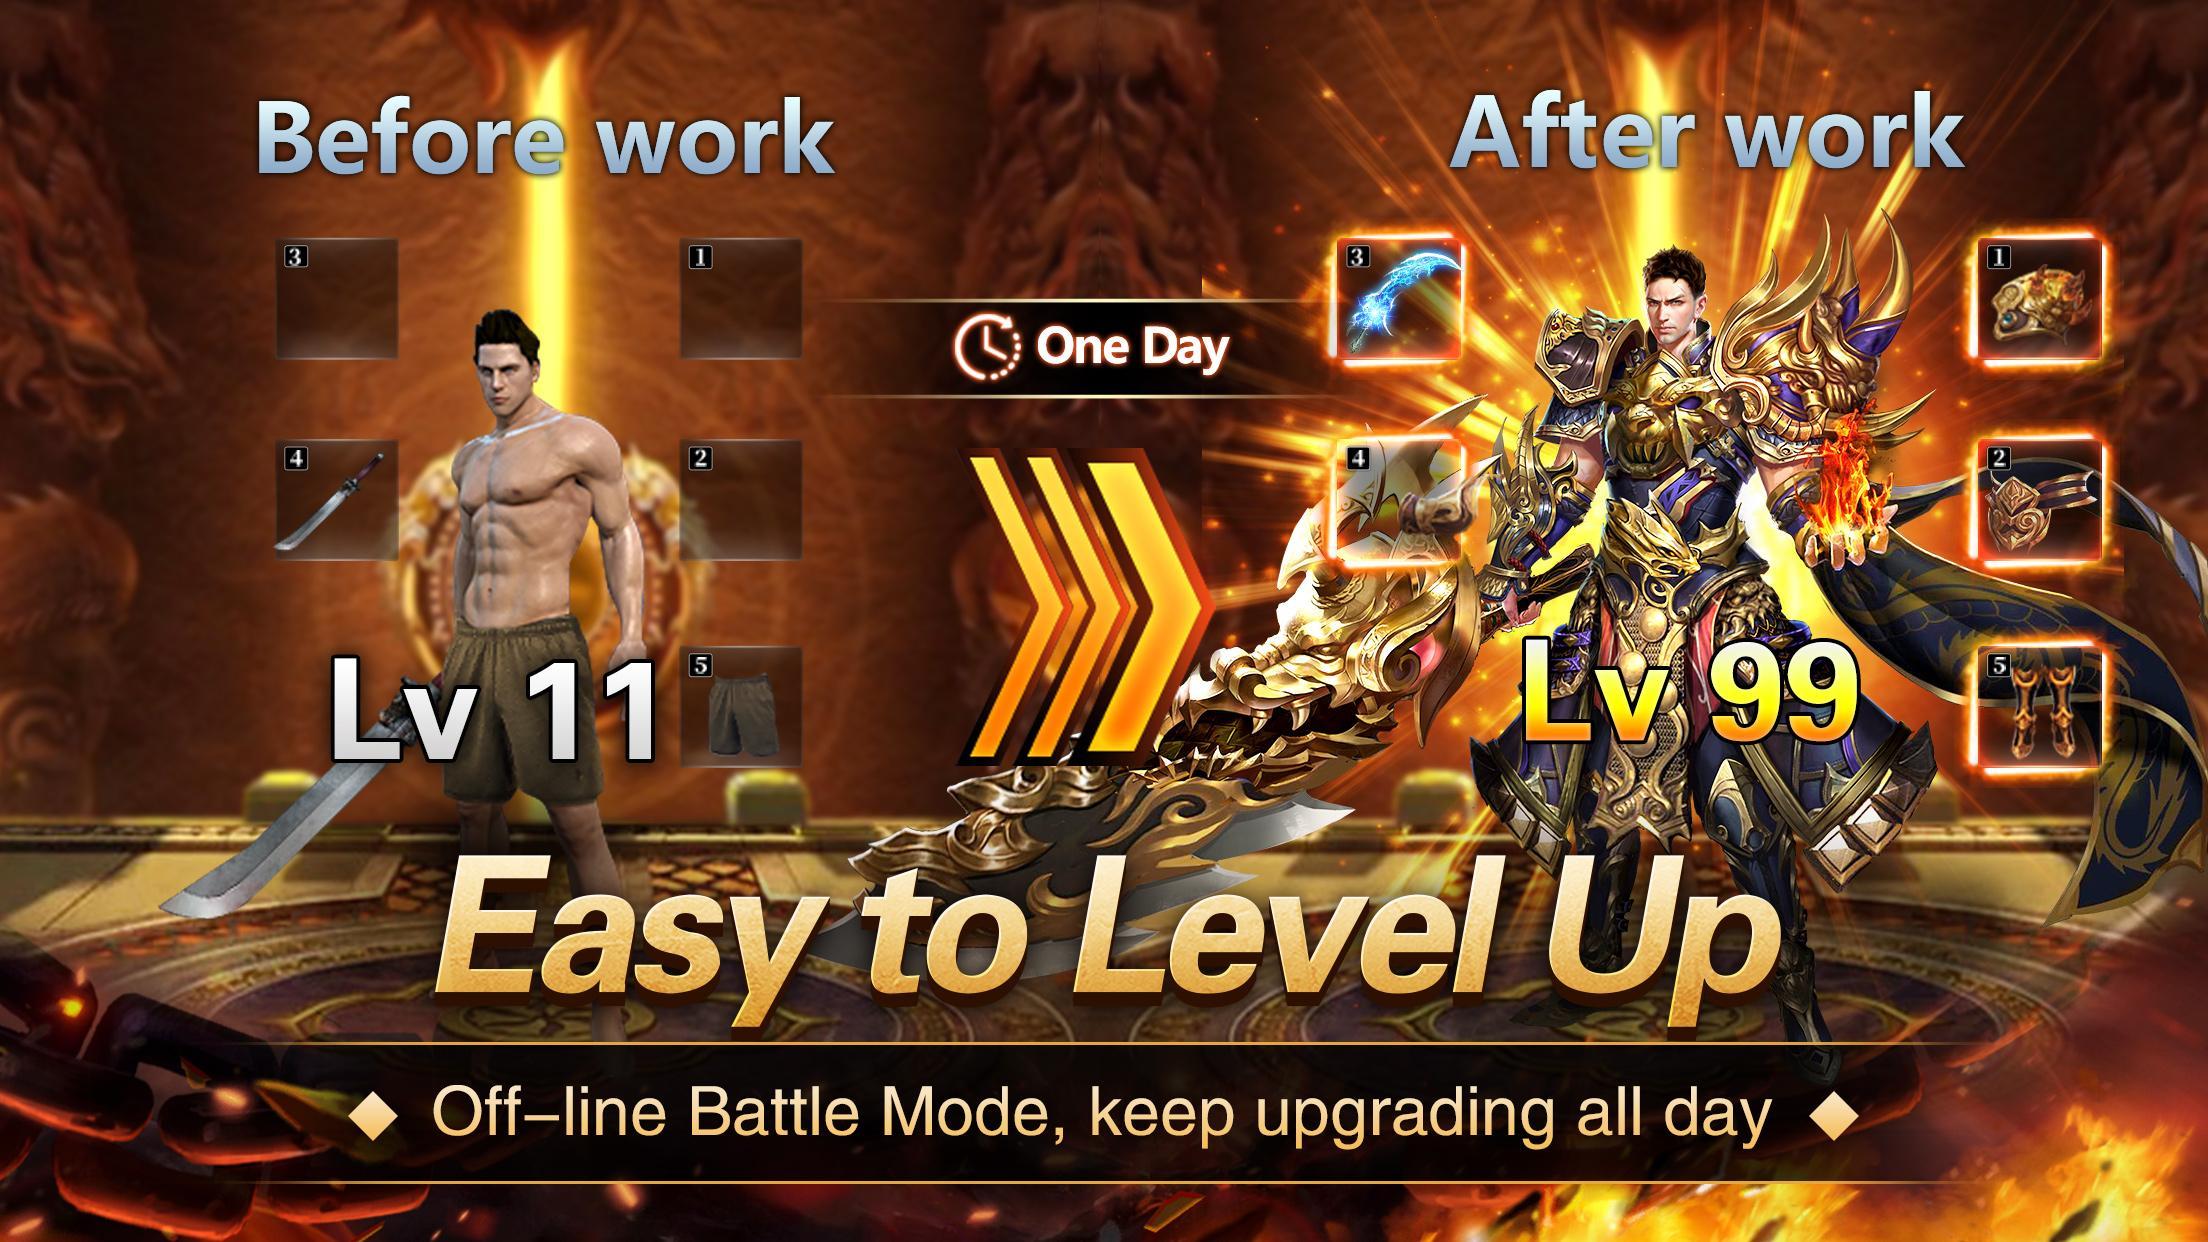 Legend of Blades for Android - APK Download